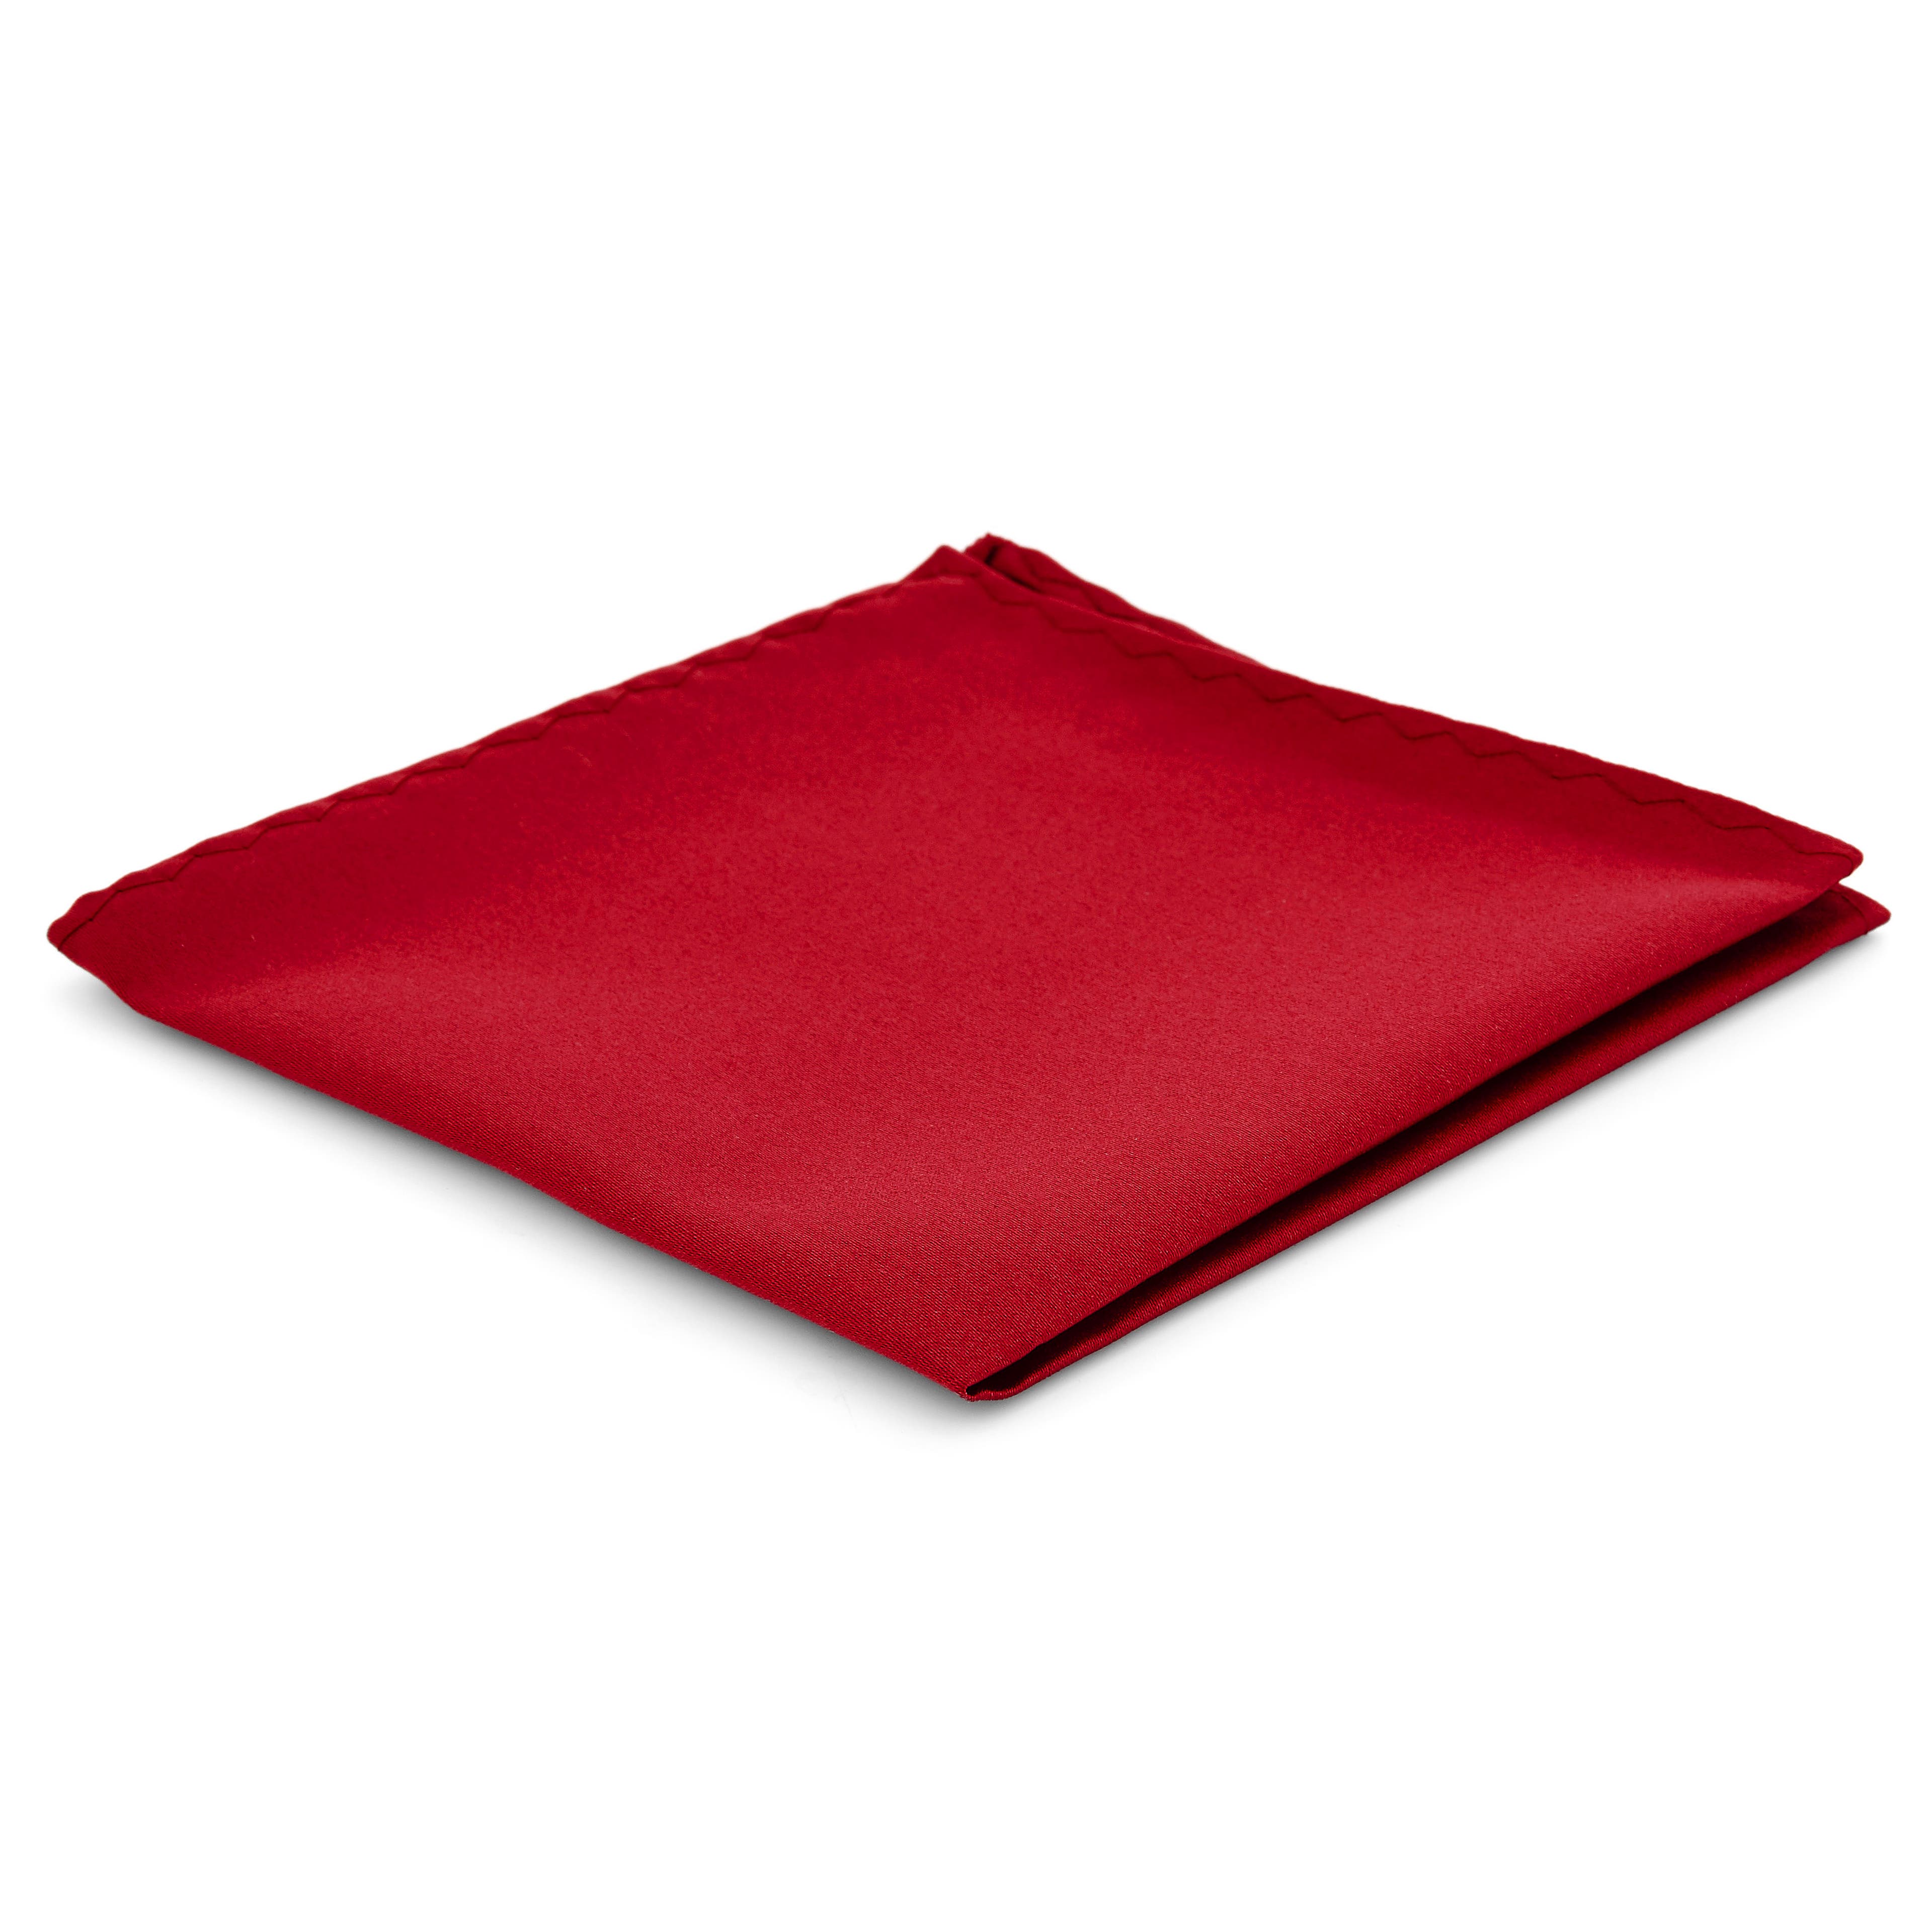 Simple Red Pocket Square